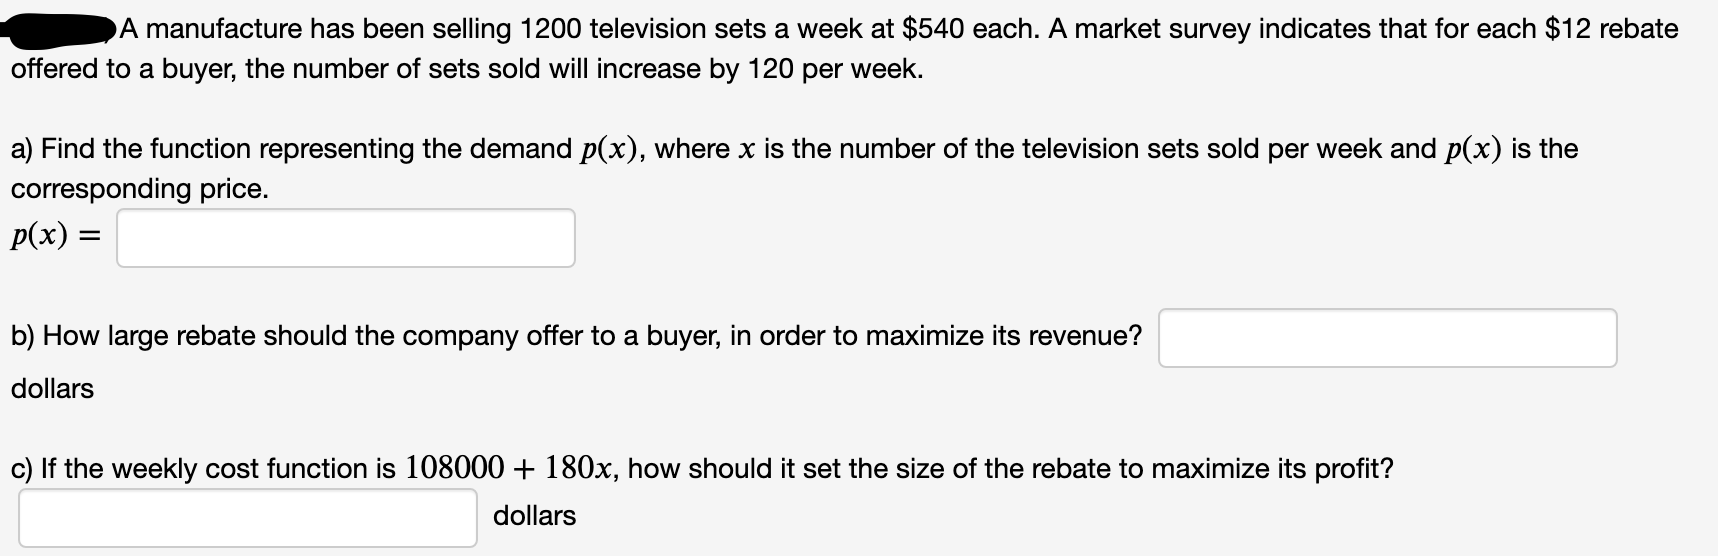 A manufacture has been selling 1200 television sets a week at $540 each. A market survey indicates that for each $12 rebate
offered to a buyer, the number of sets sold will increase by 120 per week.
